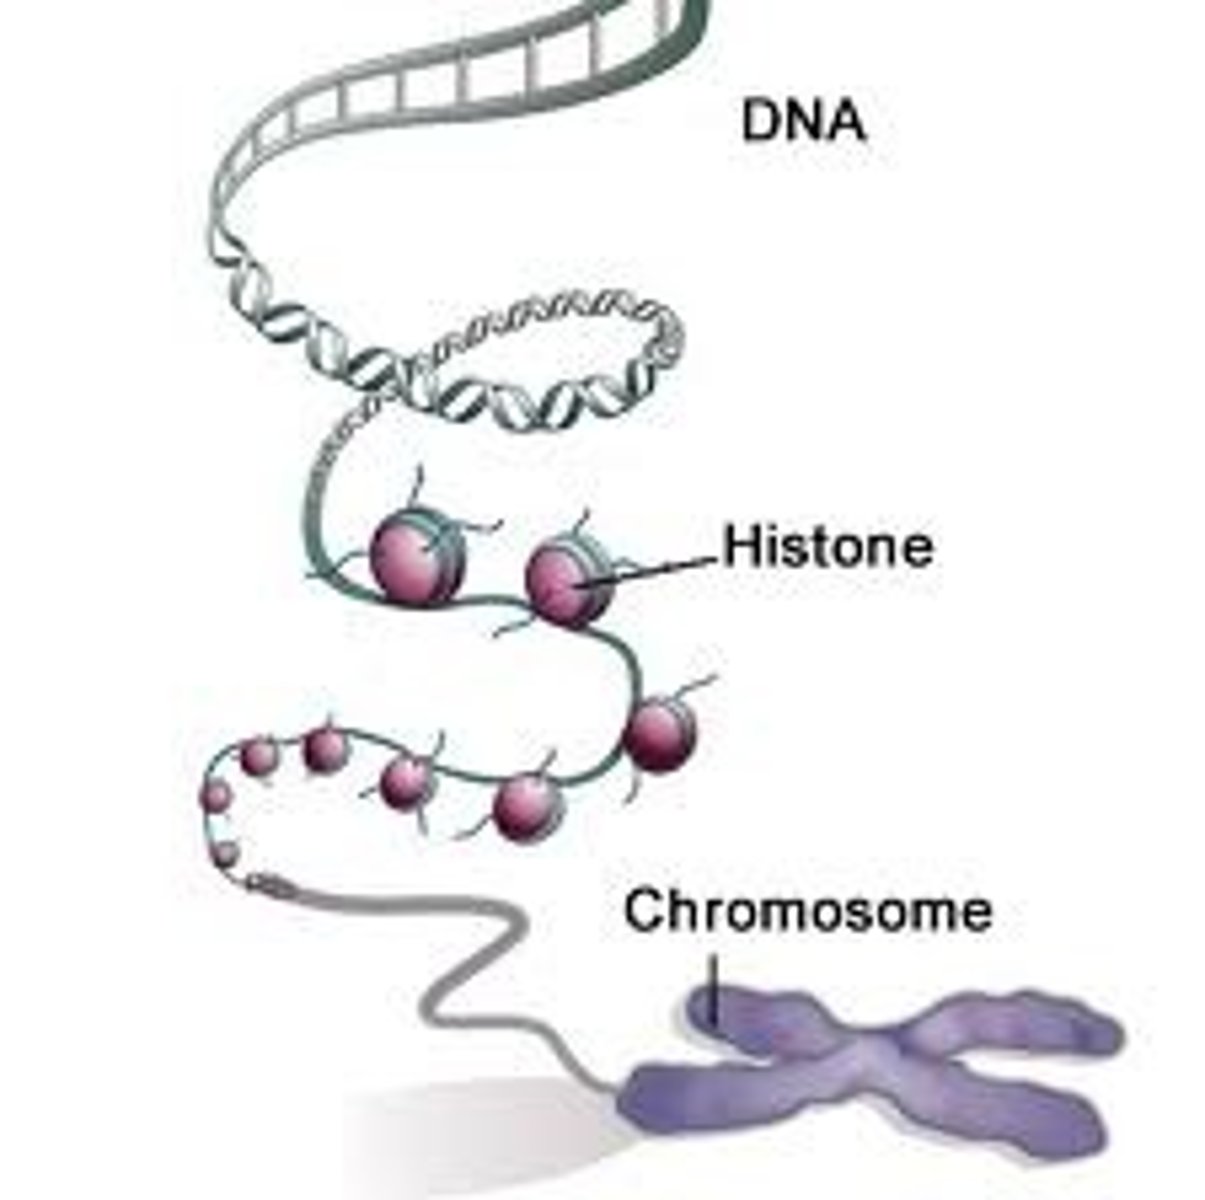 <p>globular proteins associated to chromosomes in eukaryotic cells.</p>